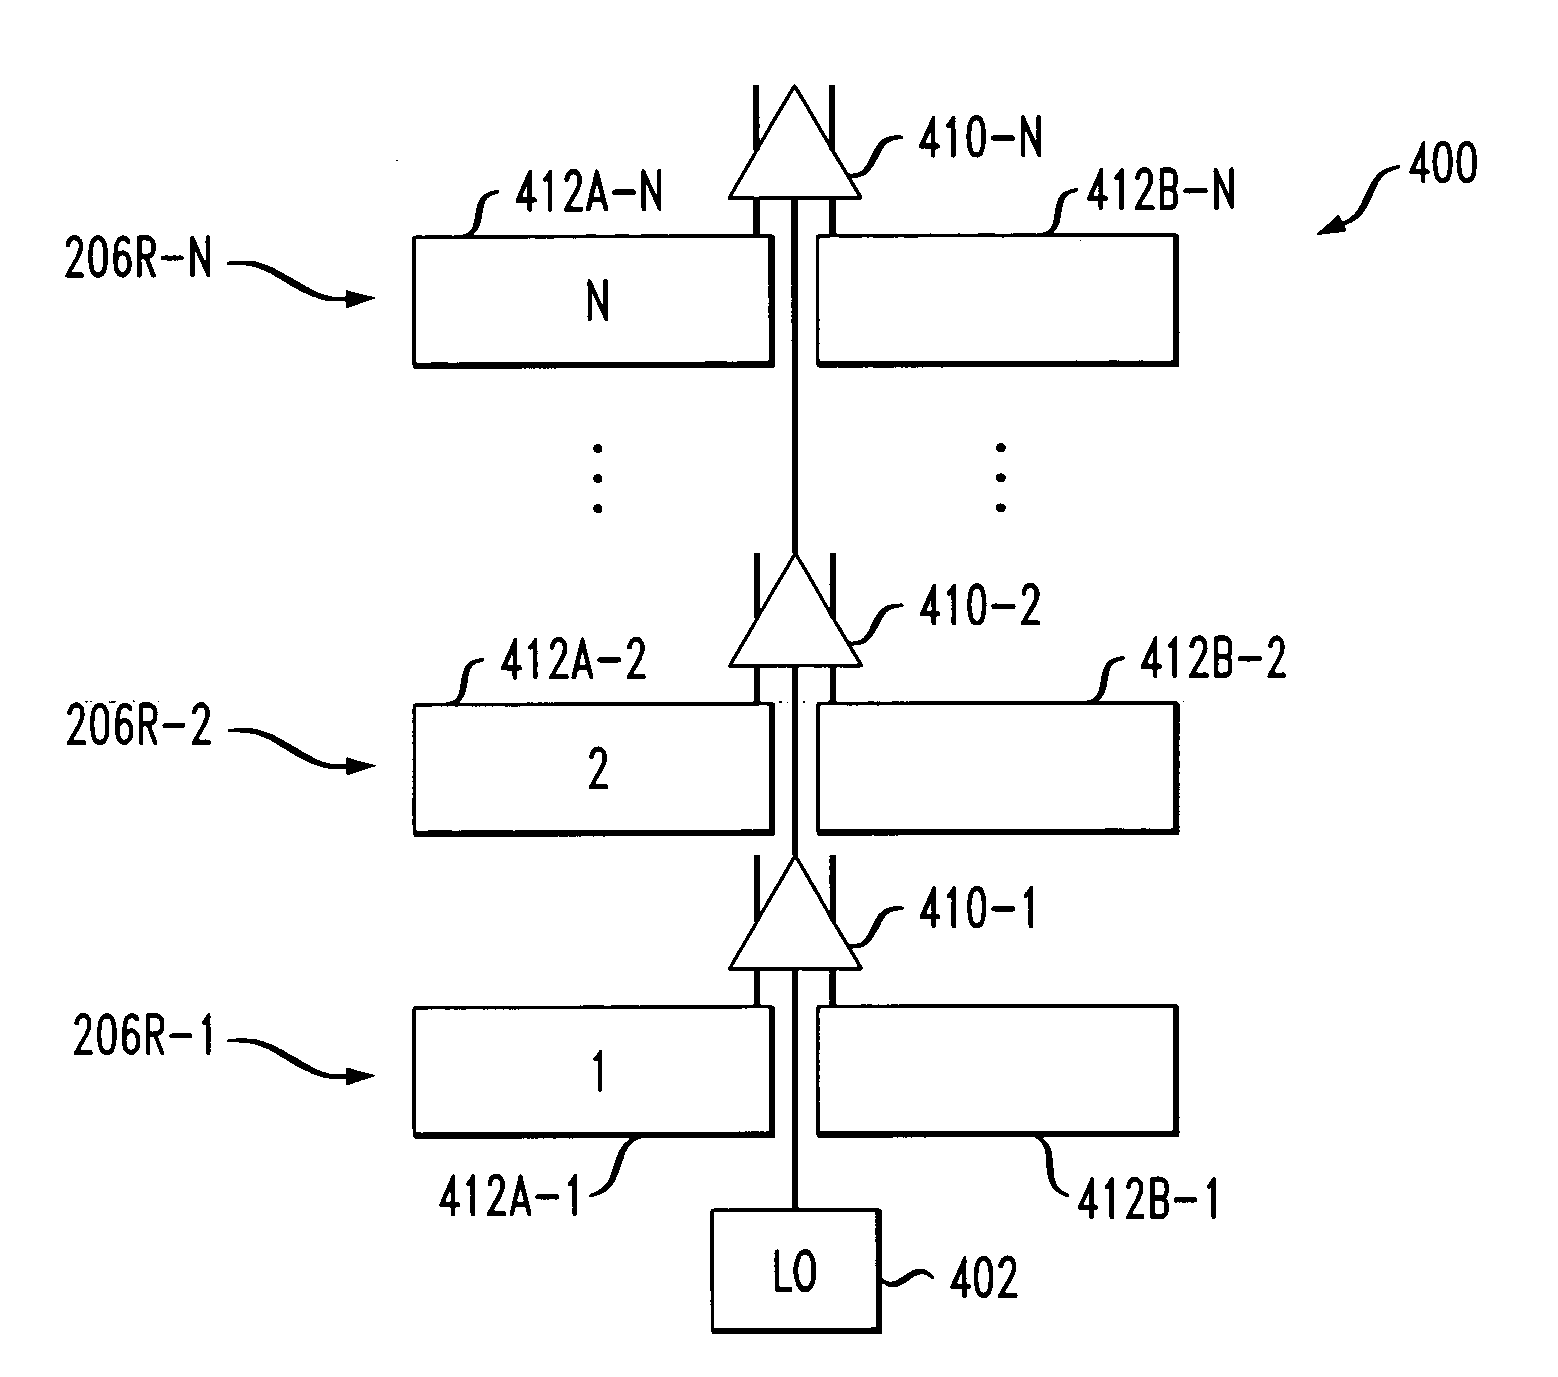 Communication system transmitter or receiver module having integrated radio frequency circuitry directly coupled to antenna element